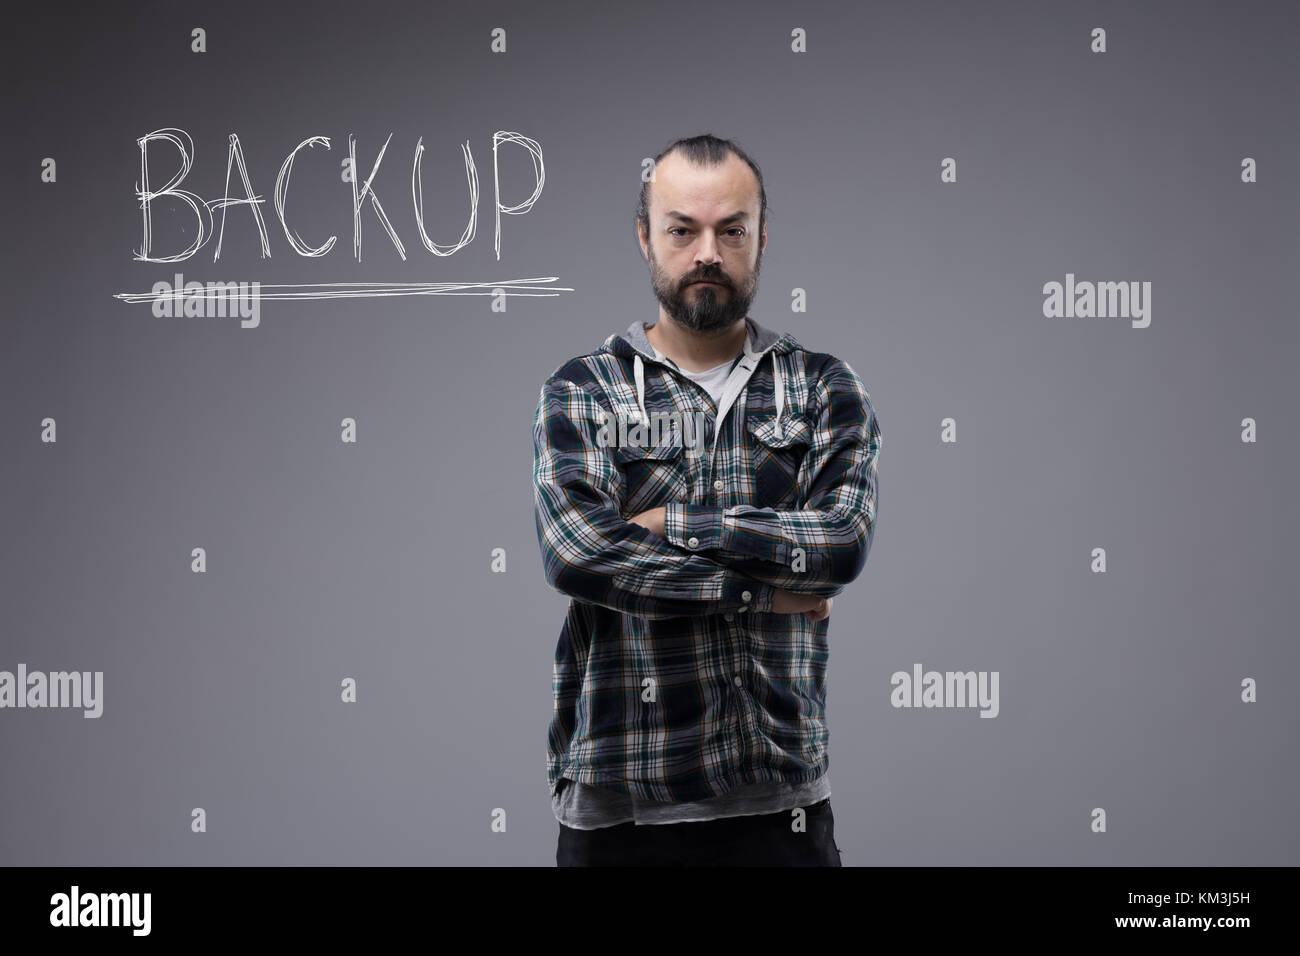 Confident bearded man in a plaid shirt standing with folded arms and a sign Backup handwritten on a blackboard behind him with copy space below Stock Photo